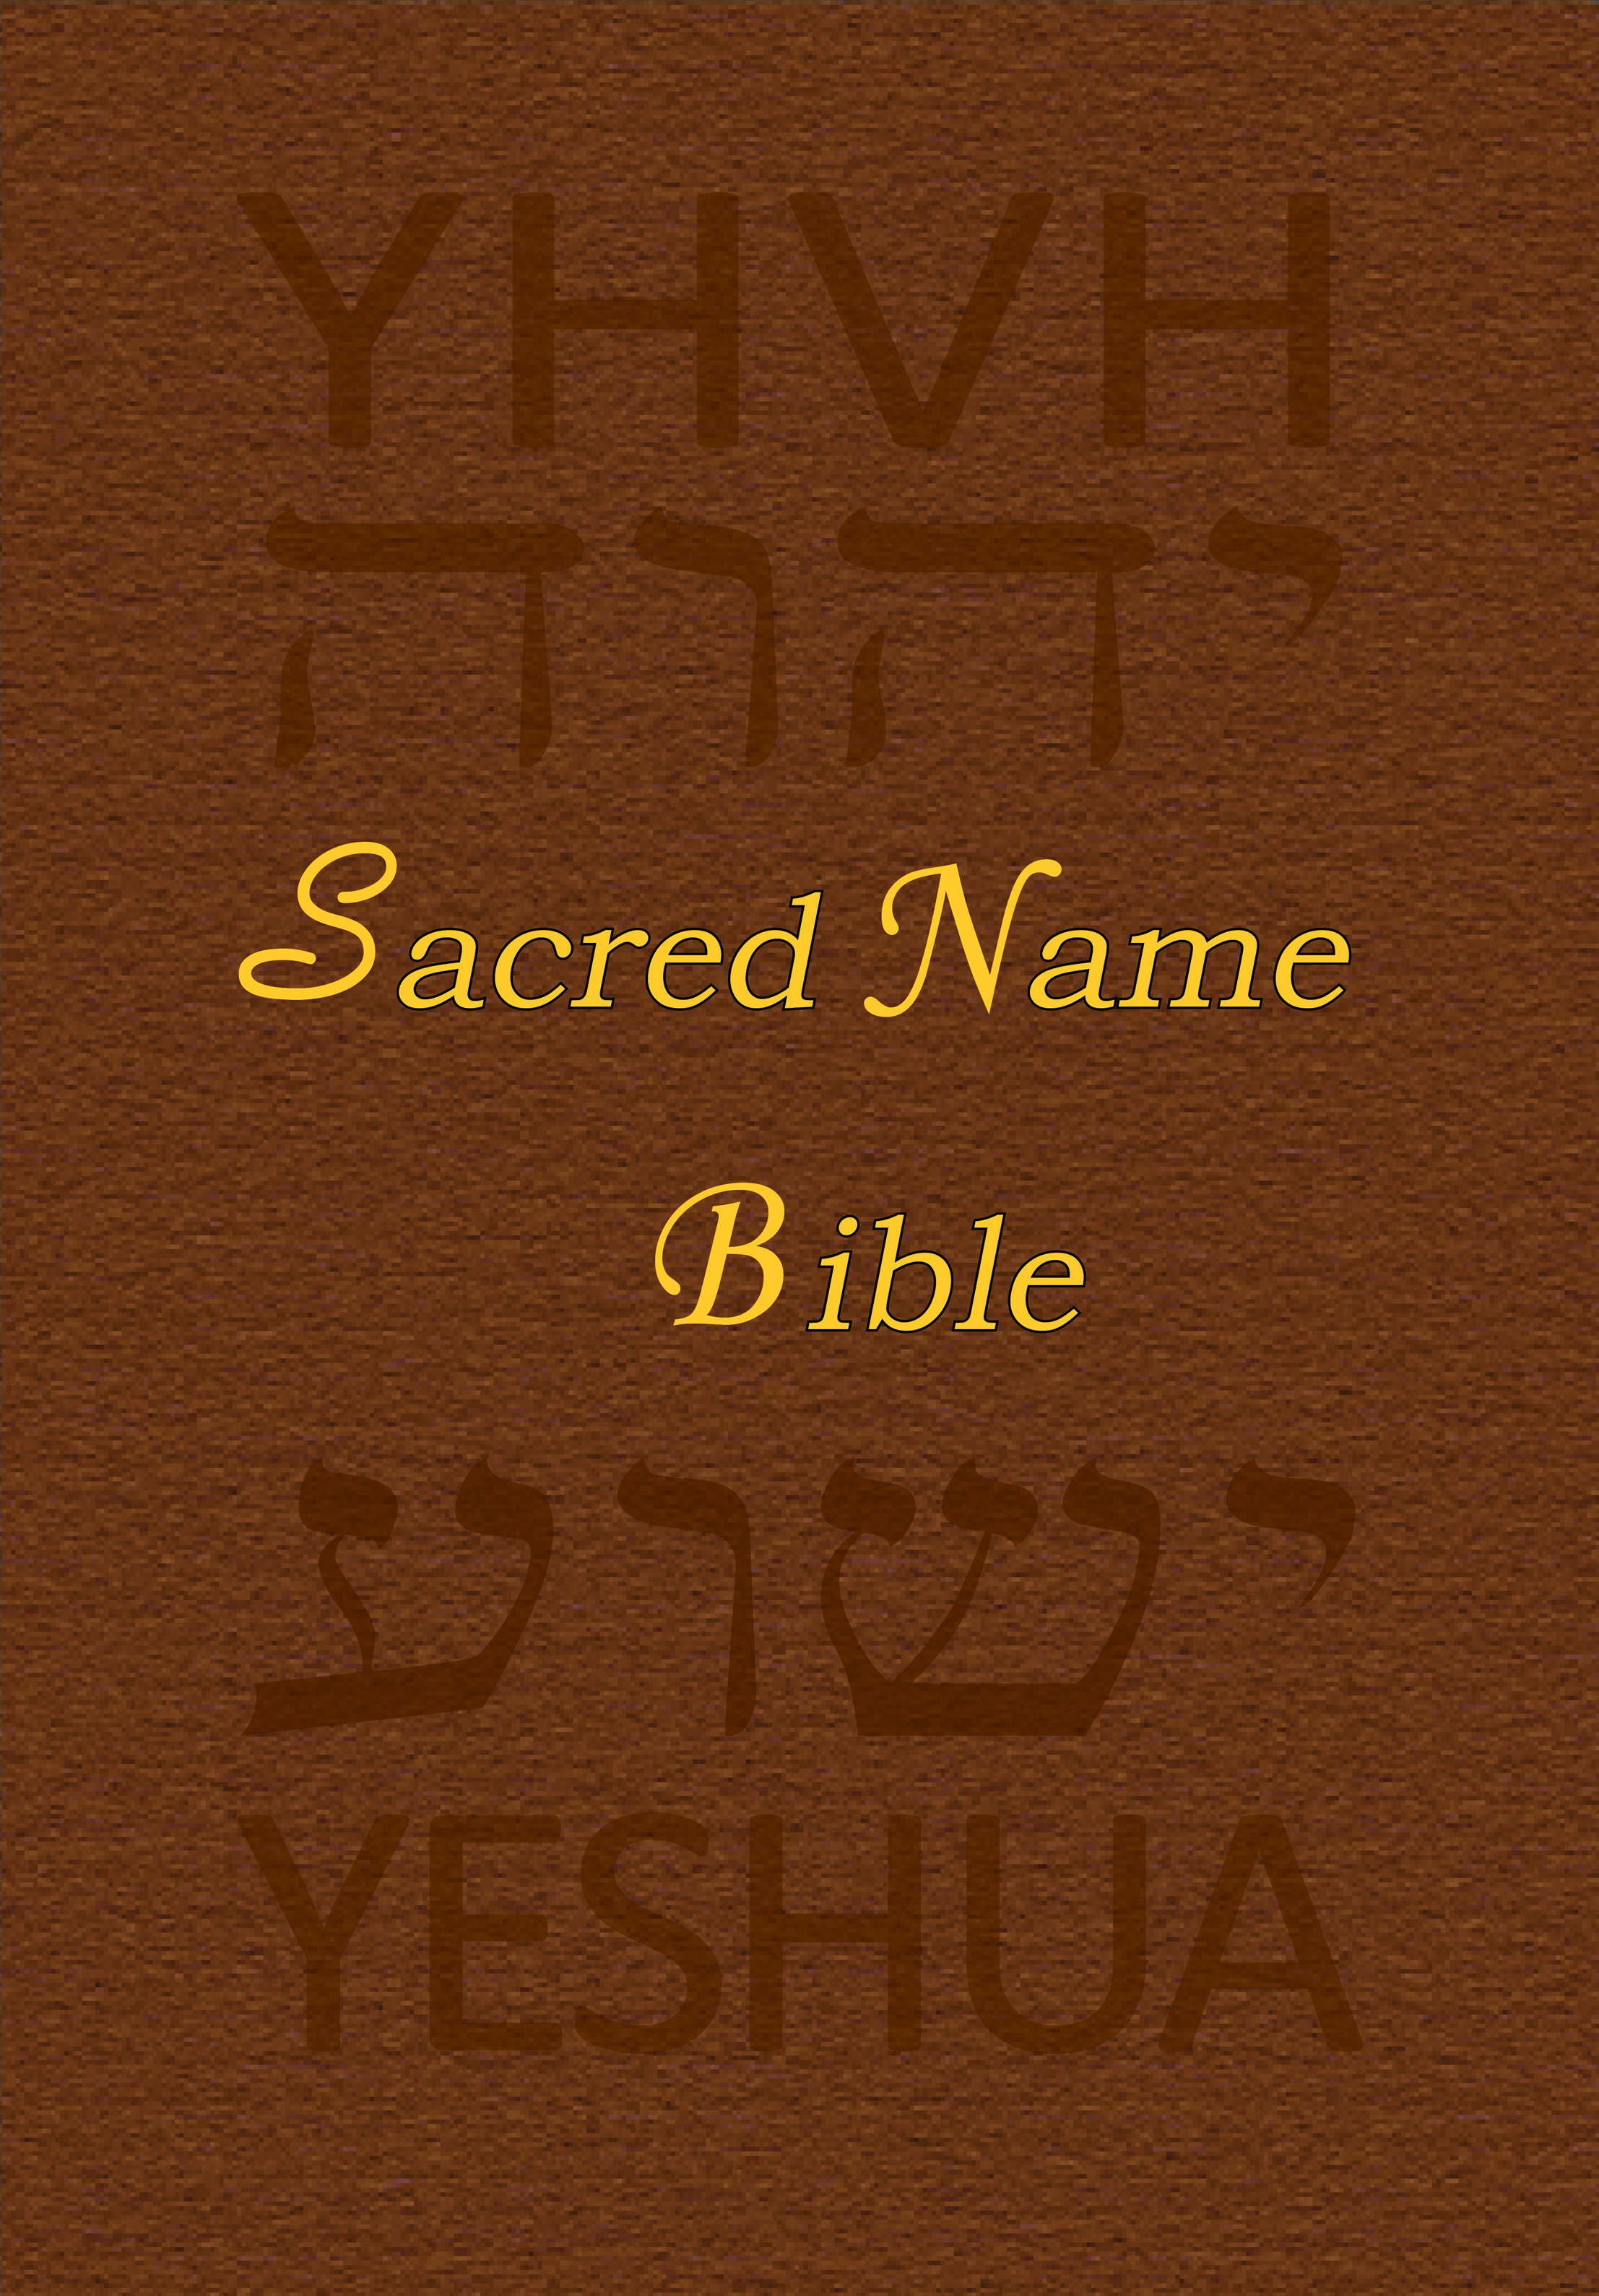 Uncovering the Profound Teachings of Jesus in the KJV Bible's Sacred Texts  - Yeshua Christ KJV Bible Study